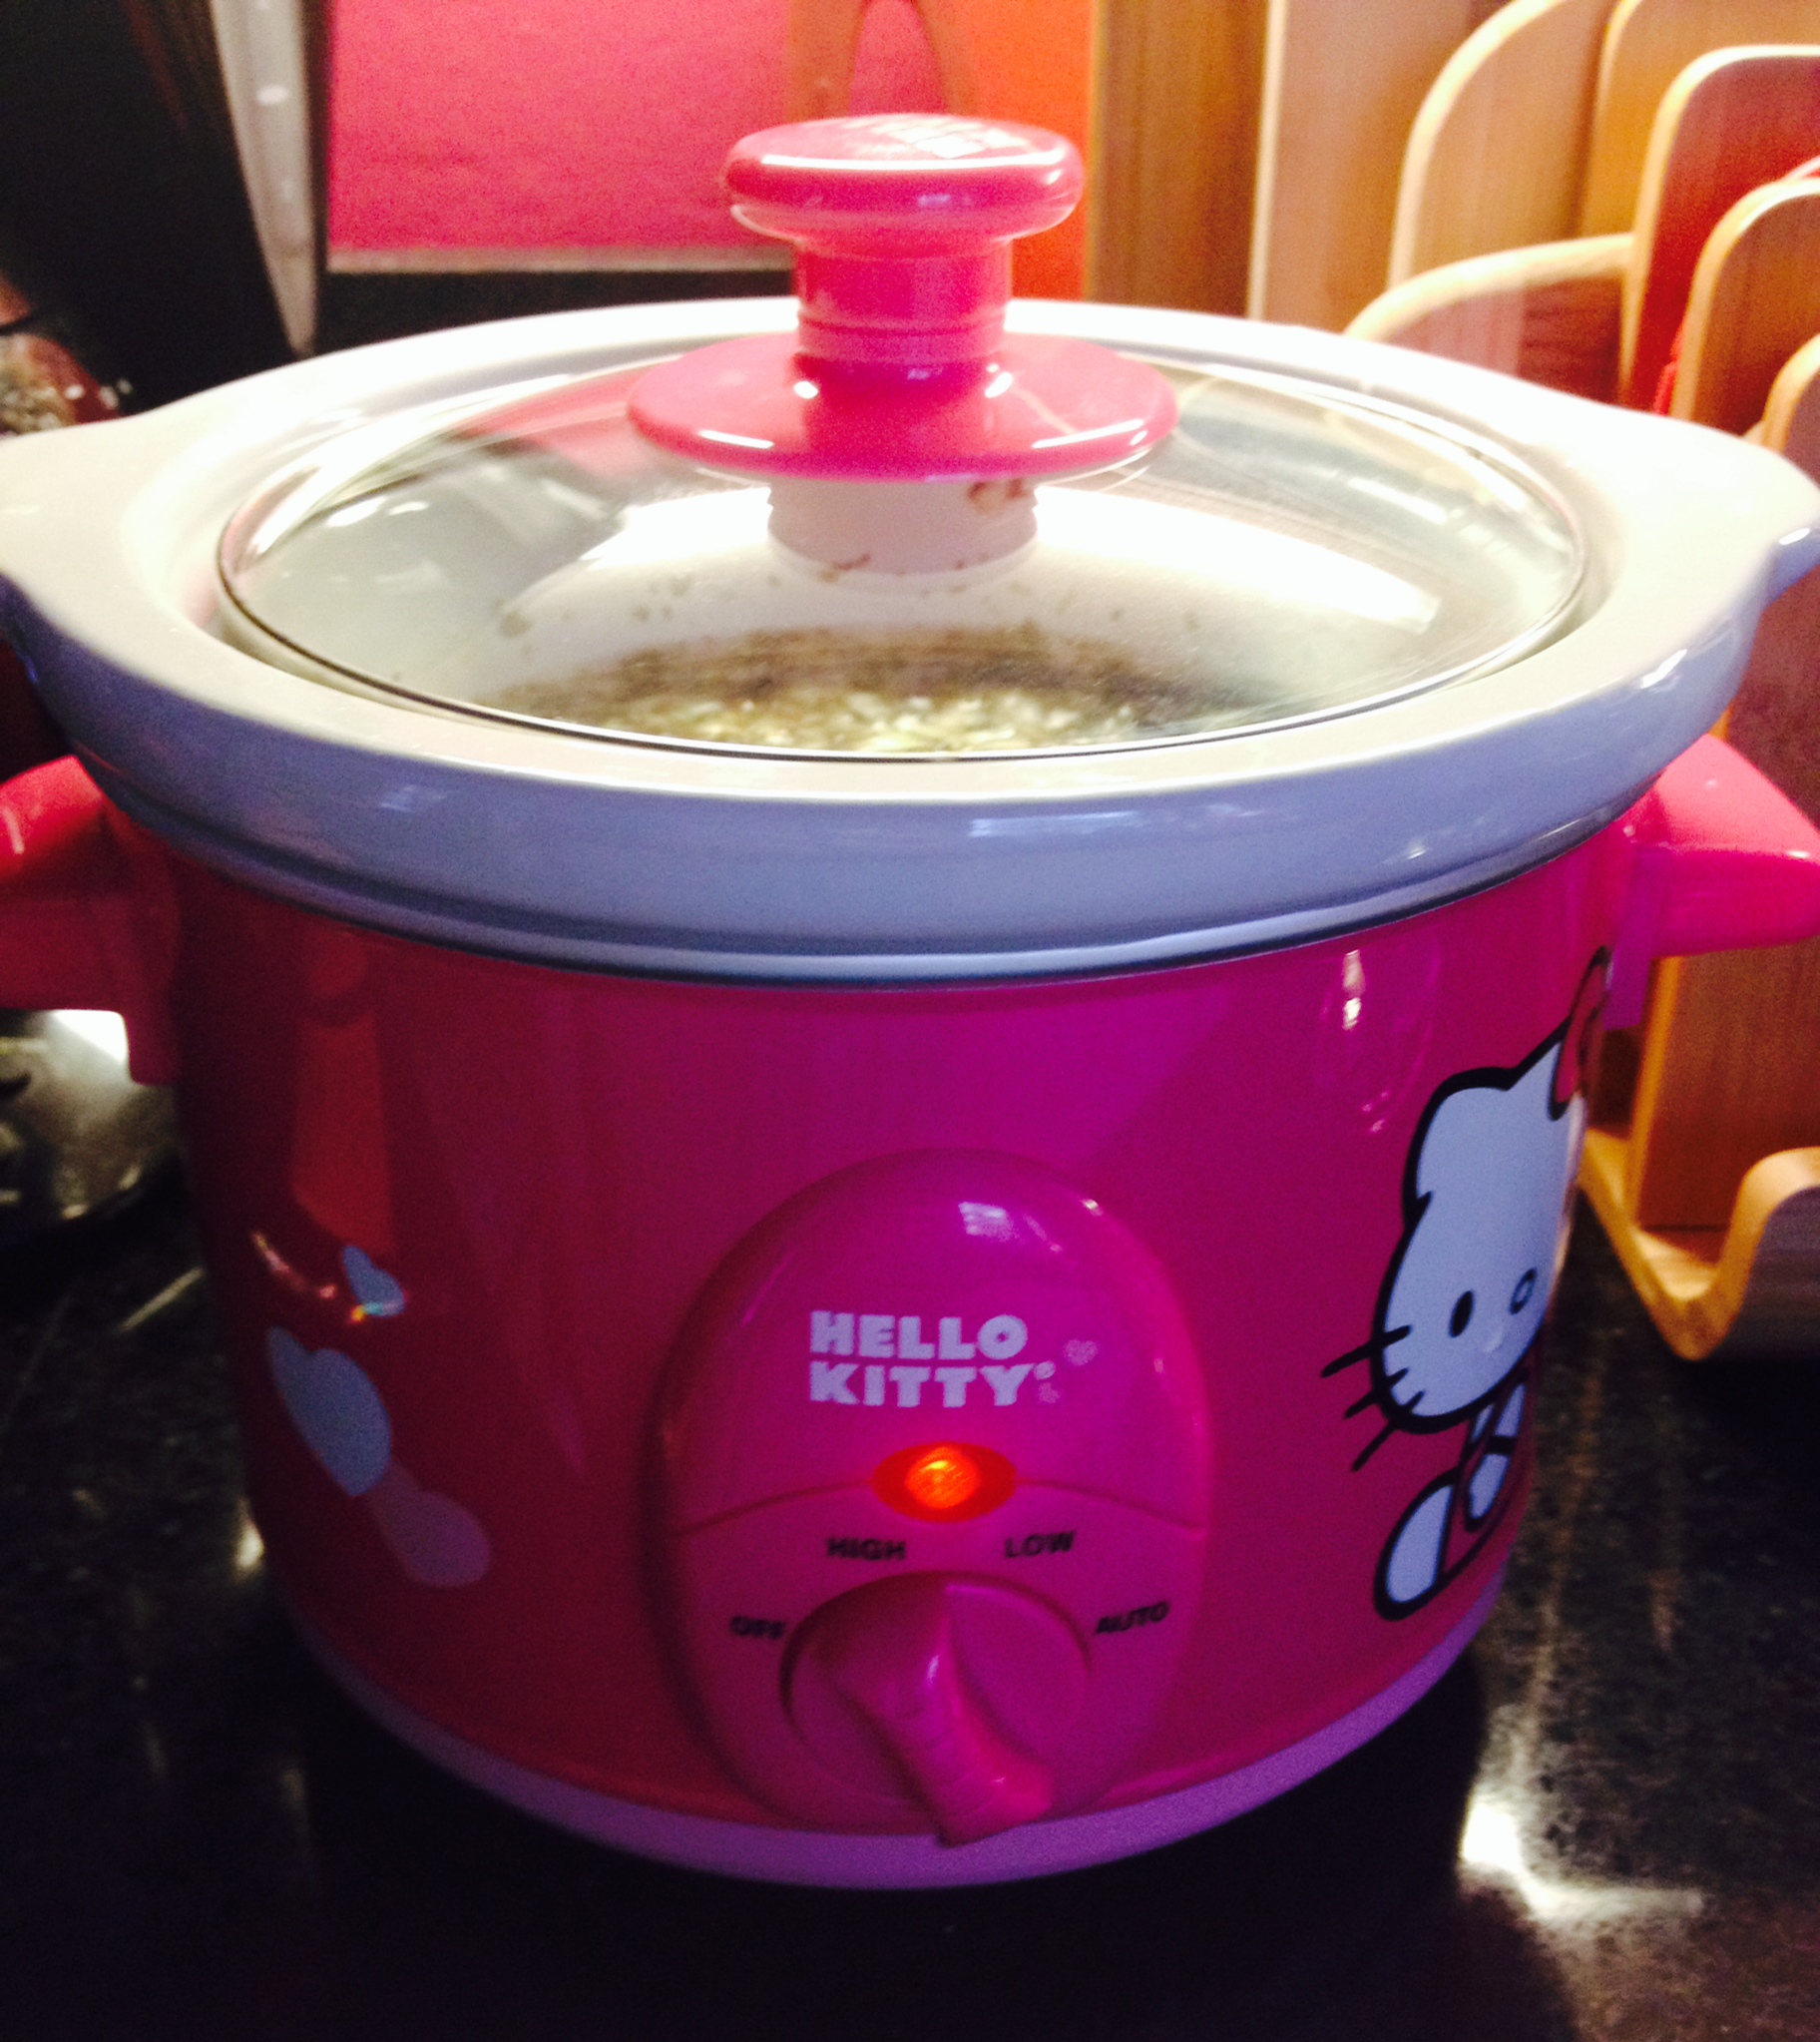 hello kitty slow cooker in action :: by radish*rose